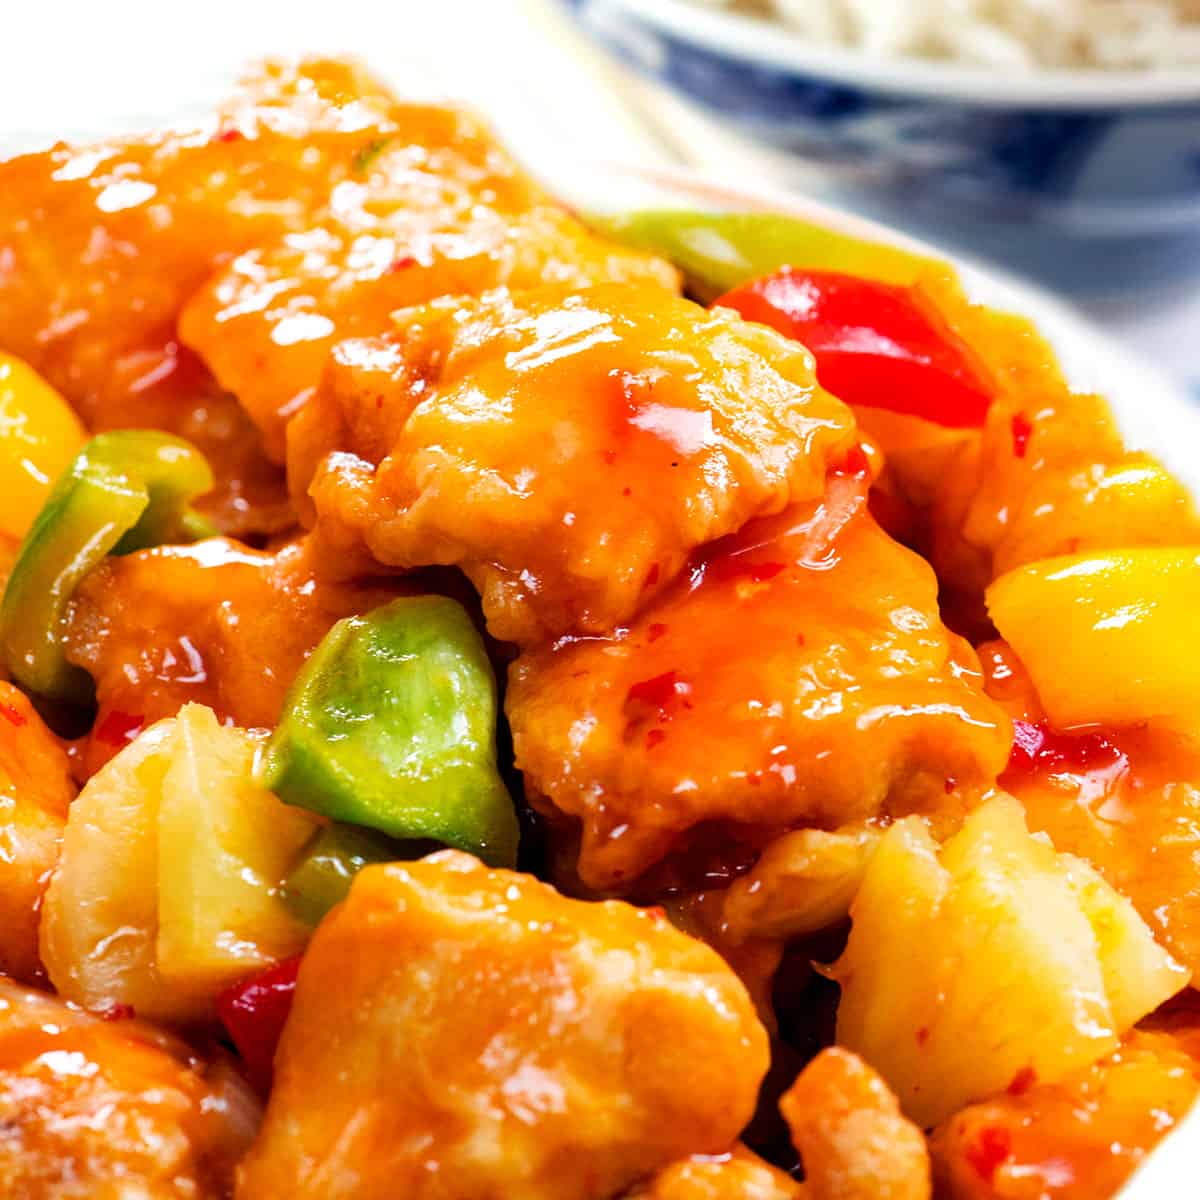 Sweet and sour. Sweet and Sour with Chicken. Вок курица с сыром м овощами.